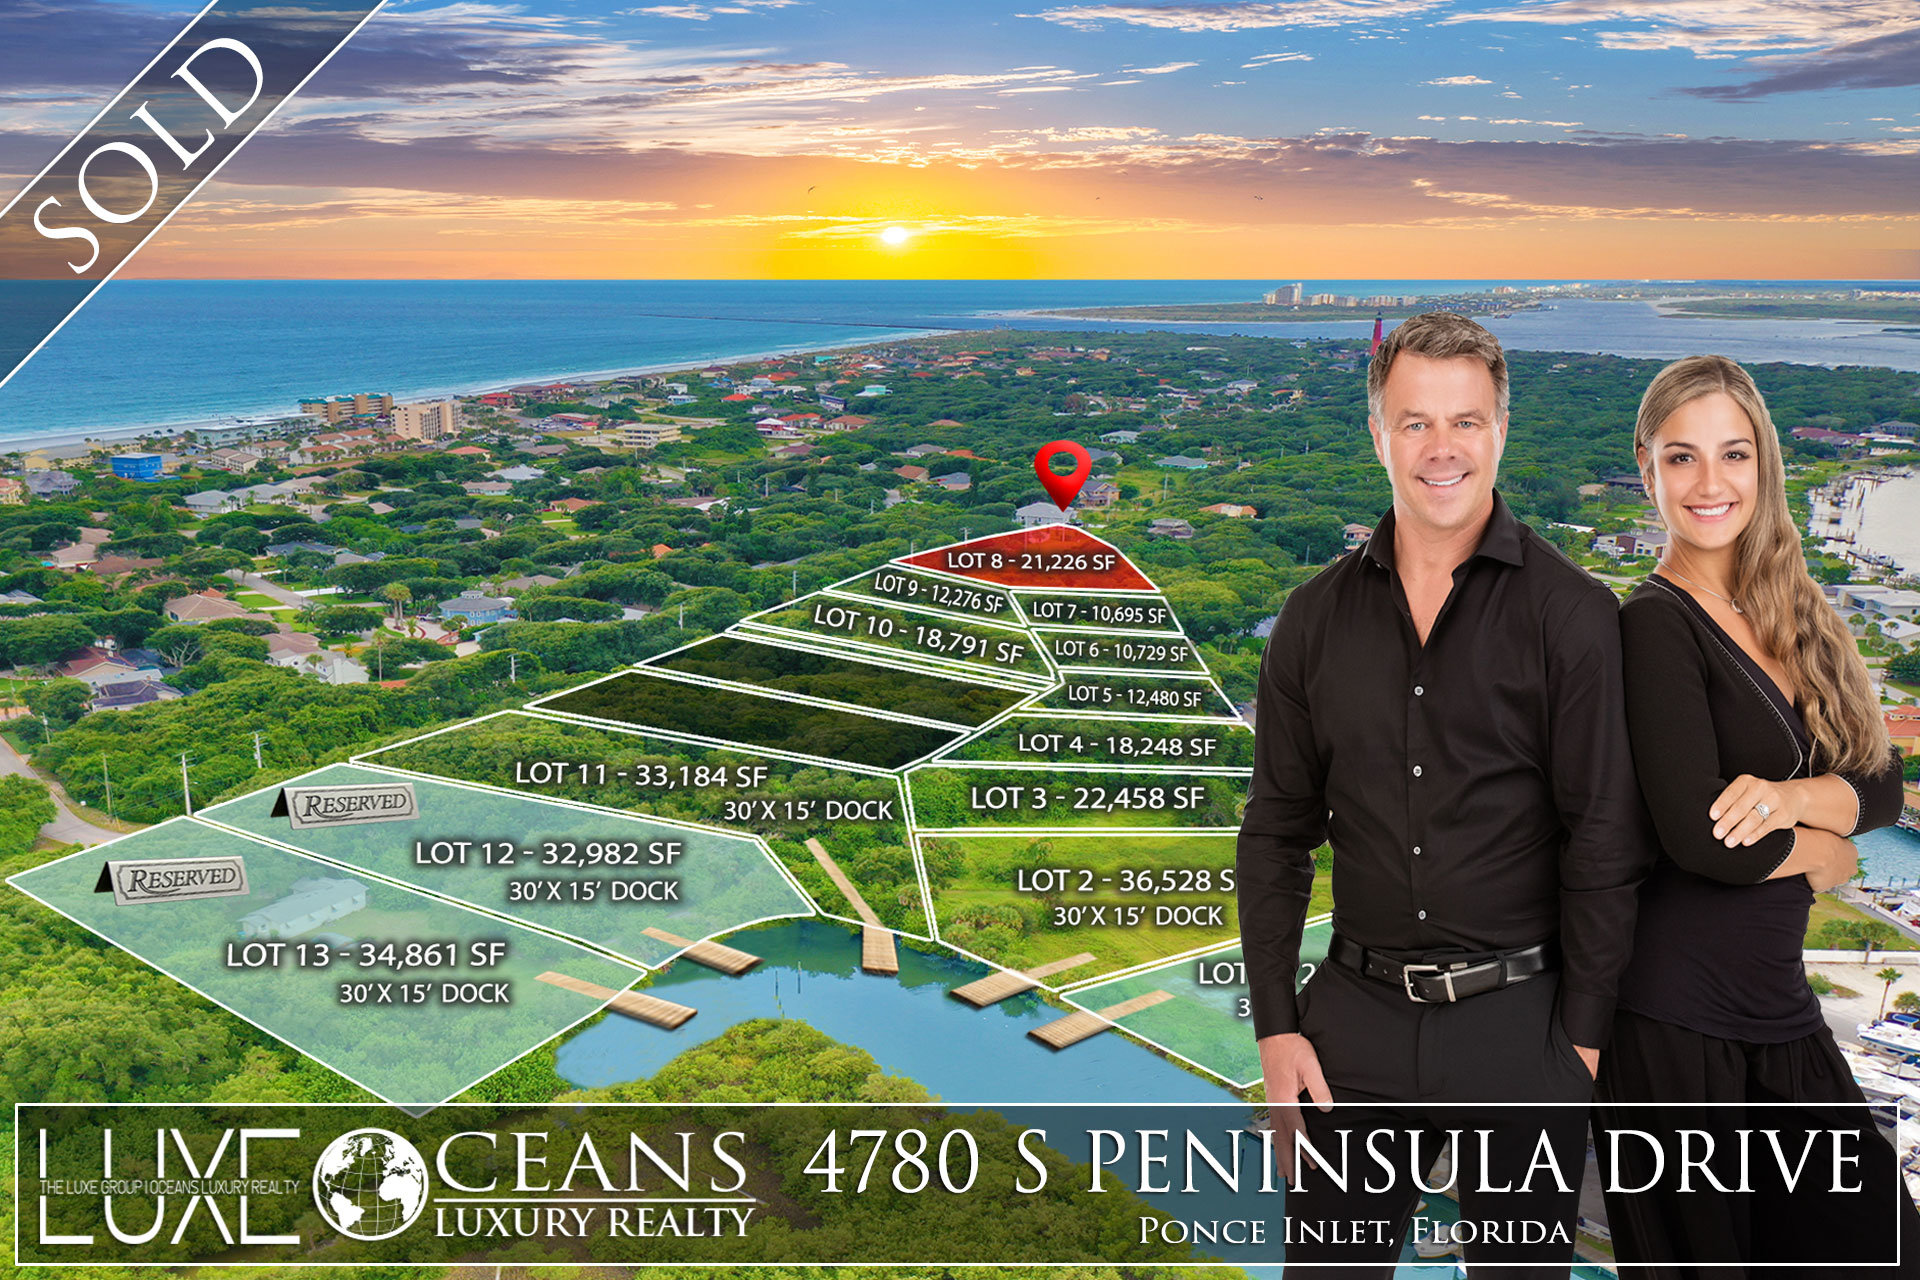 Ponce Inlet Real Estate For Sale. 4780 S Peninsula Drive Beachside Inlet Harbor Estates  land Sold